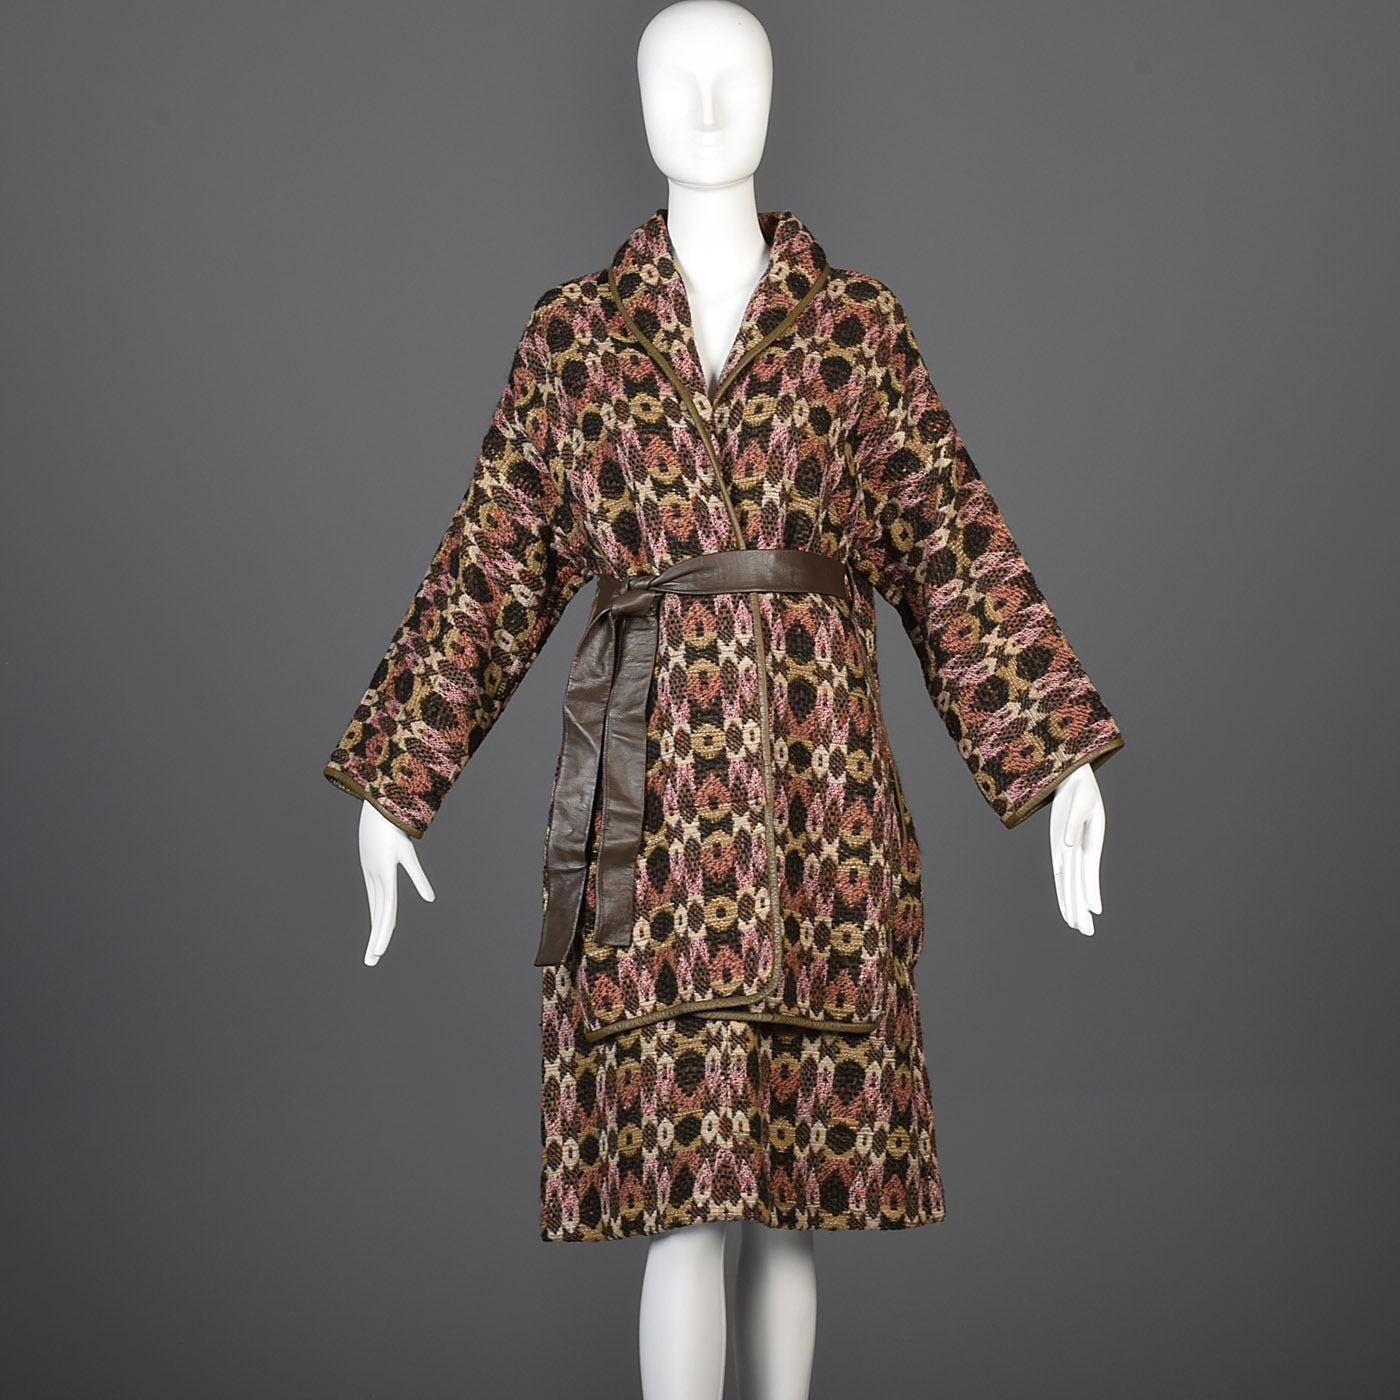 Late 1960s Bonnie Cashin Sills Bohemian Tweed Separates with Leather Trim